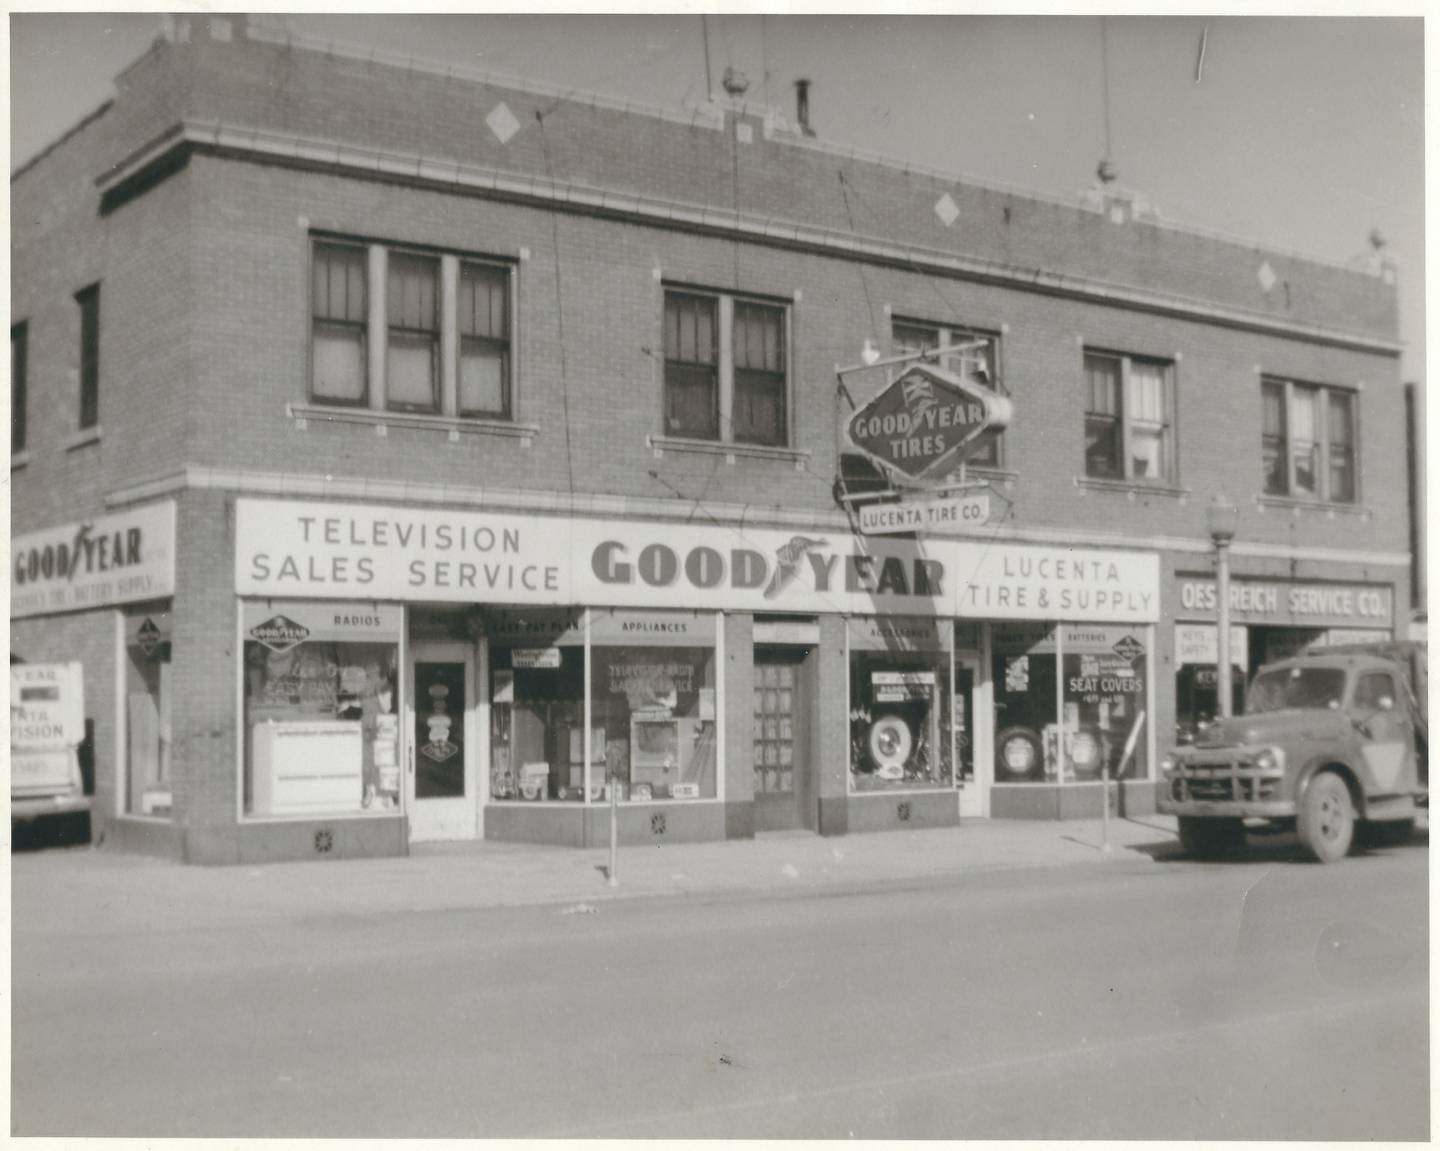 John Lucenta Sr. started Lucenta Tire in Will County 75 years ago, after coming to the U.S. from Italy as a boy not knowing how to speak English. The last of its six locations closed for good on May 25 due to high rent. Pictured is the Chicago Street location in Joliet in the 1940s.